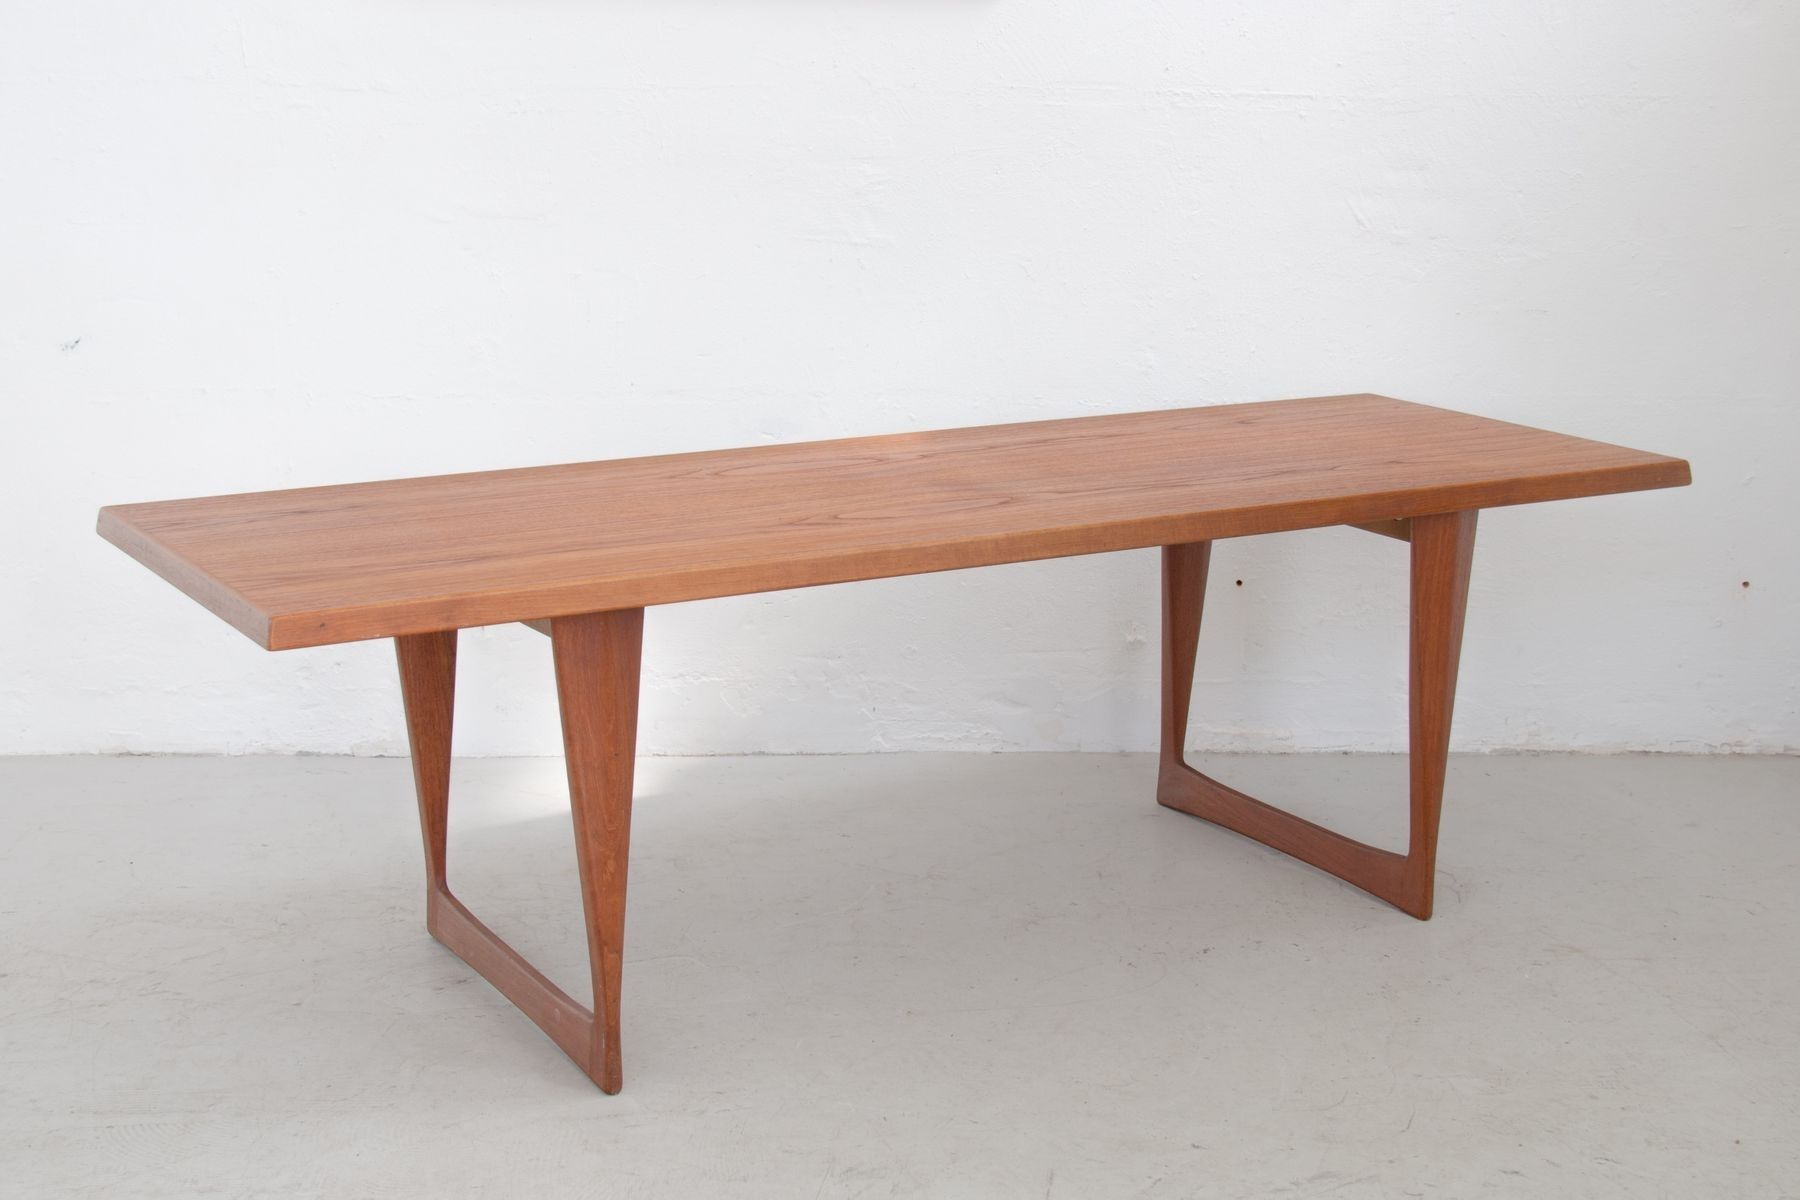 Large Vintage Teak Coffee Table With Skid Feet For Sale At Pamono Intended For Large Teak Coffee Tables (View 6 of 30)